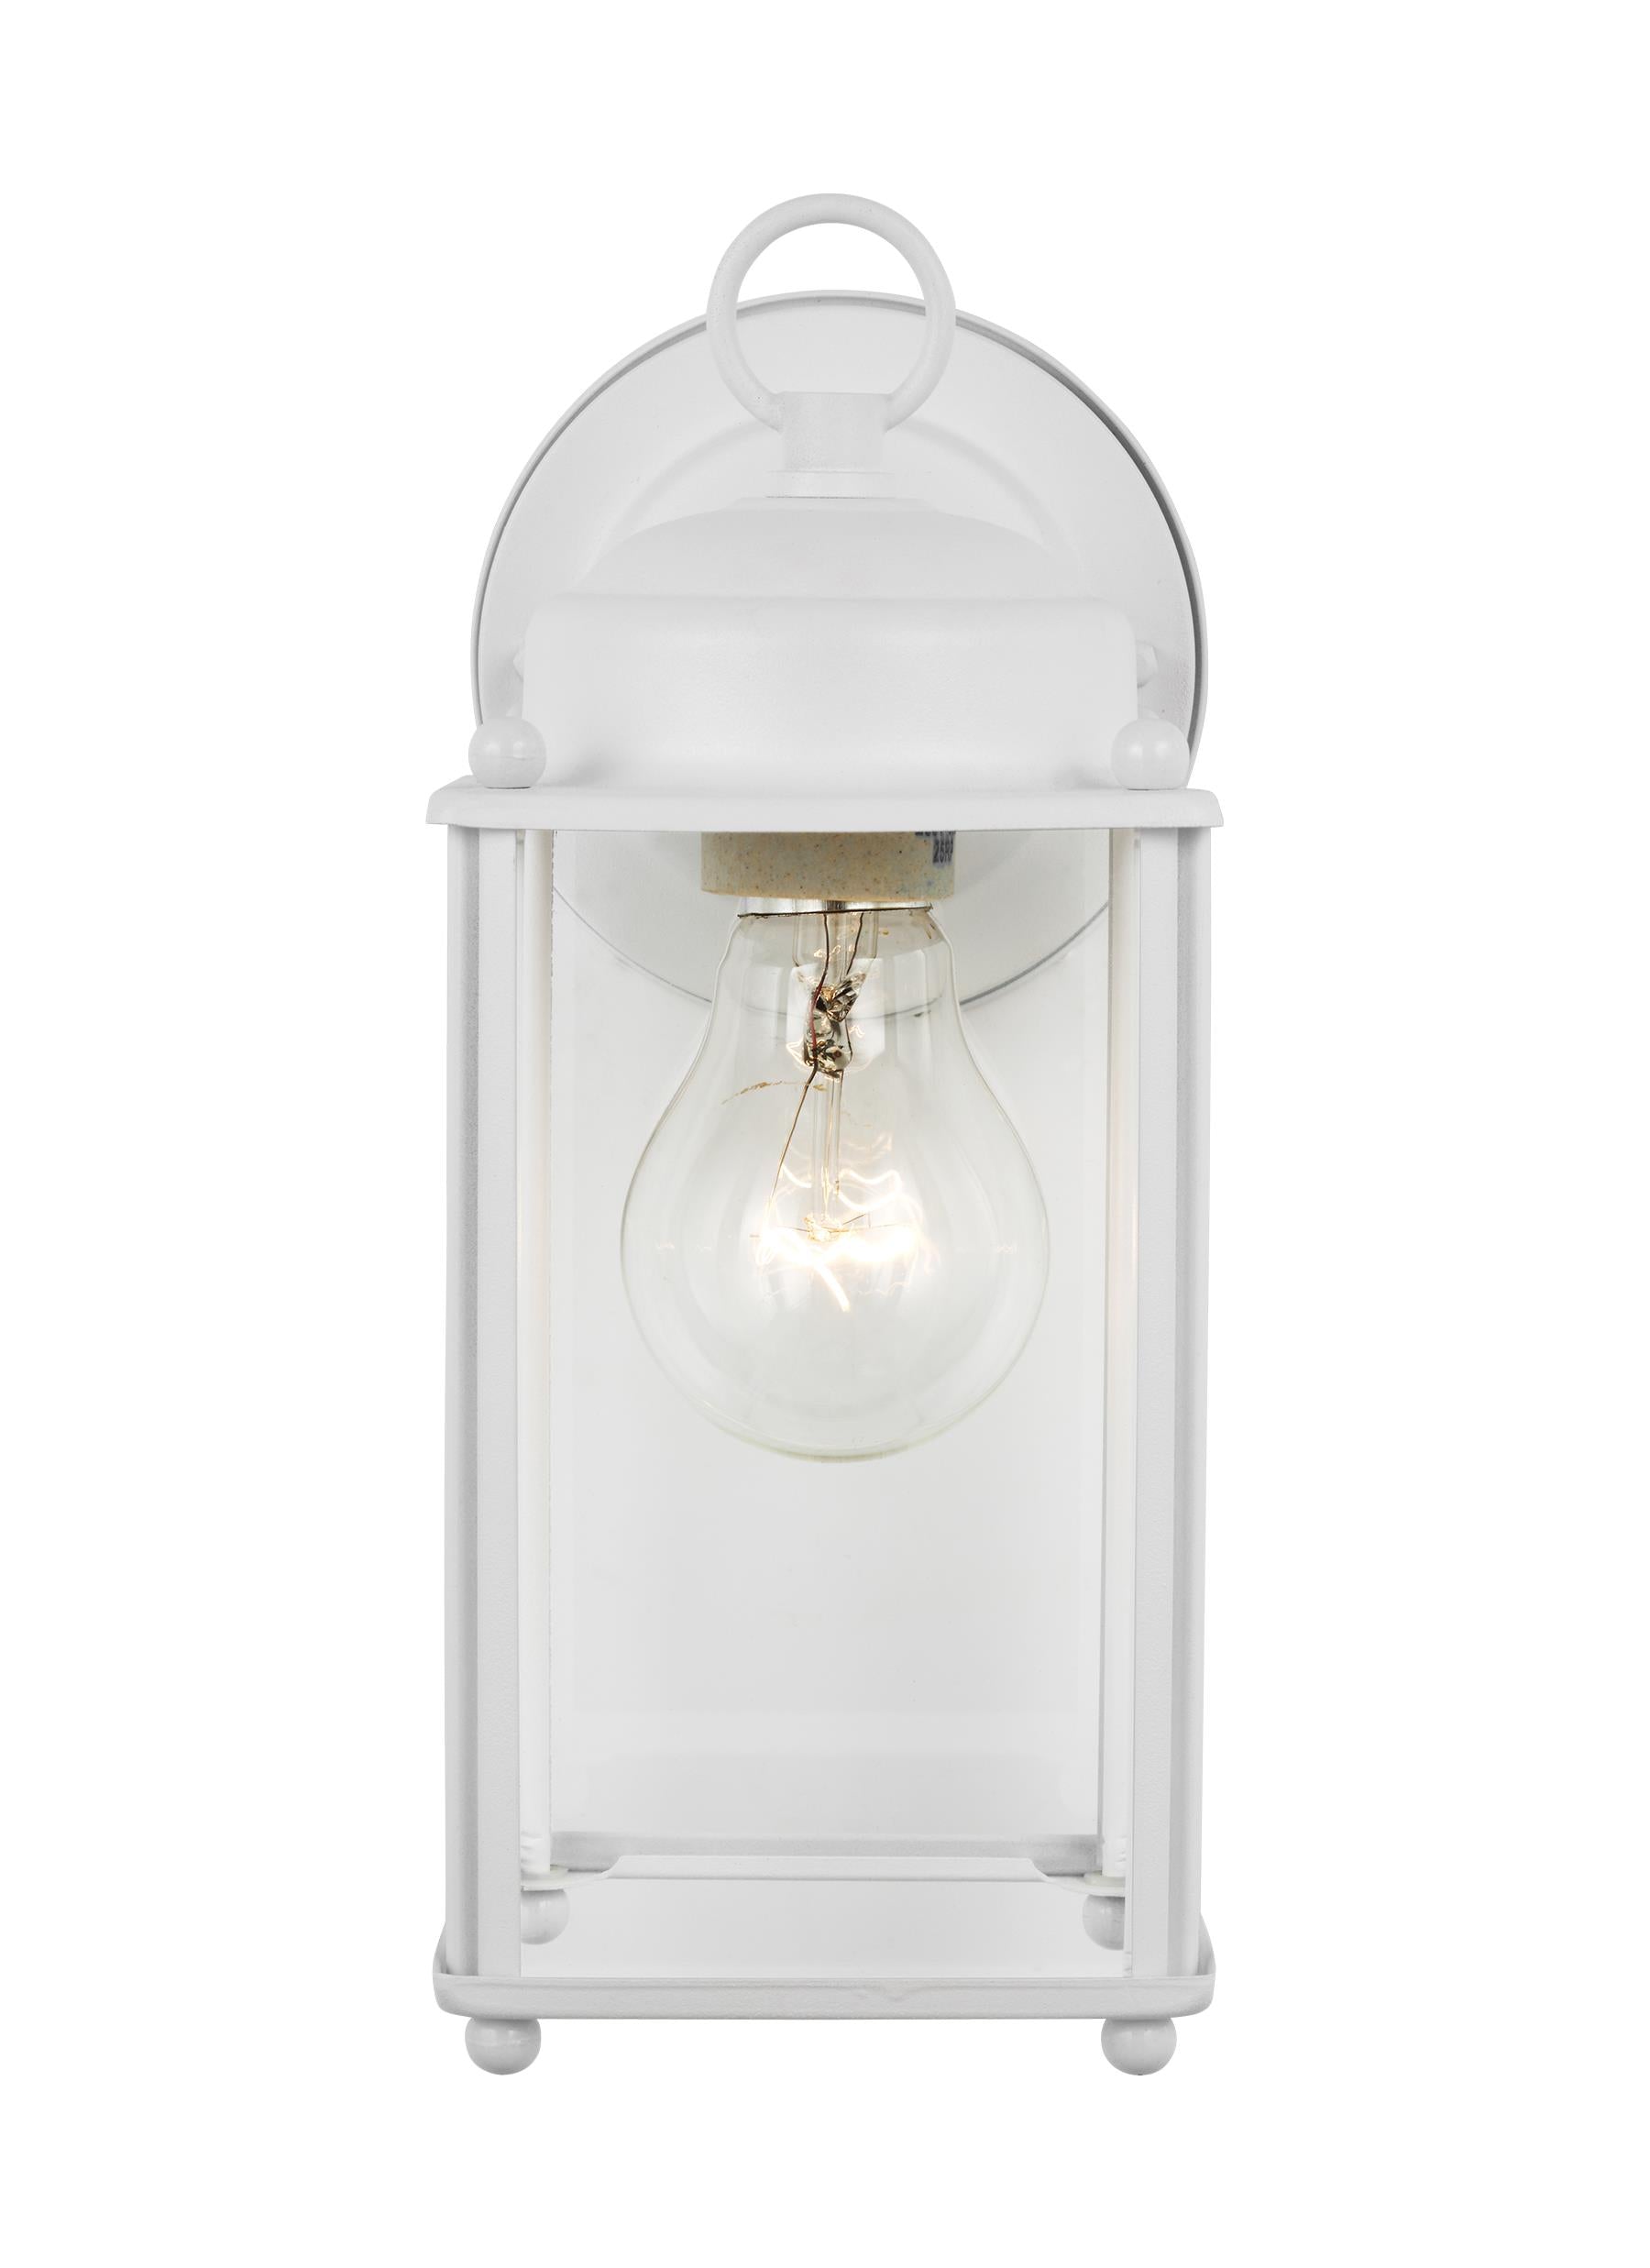 New Castle traditional 1-light outdoor exterior large wall lantern sconce in white finish with clear glass panels